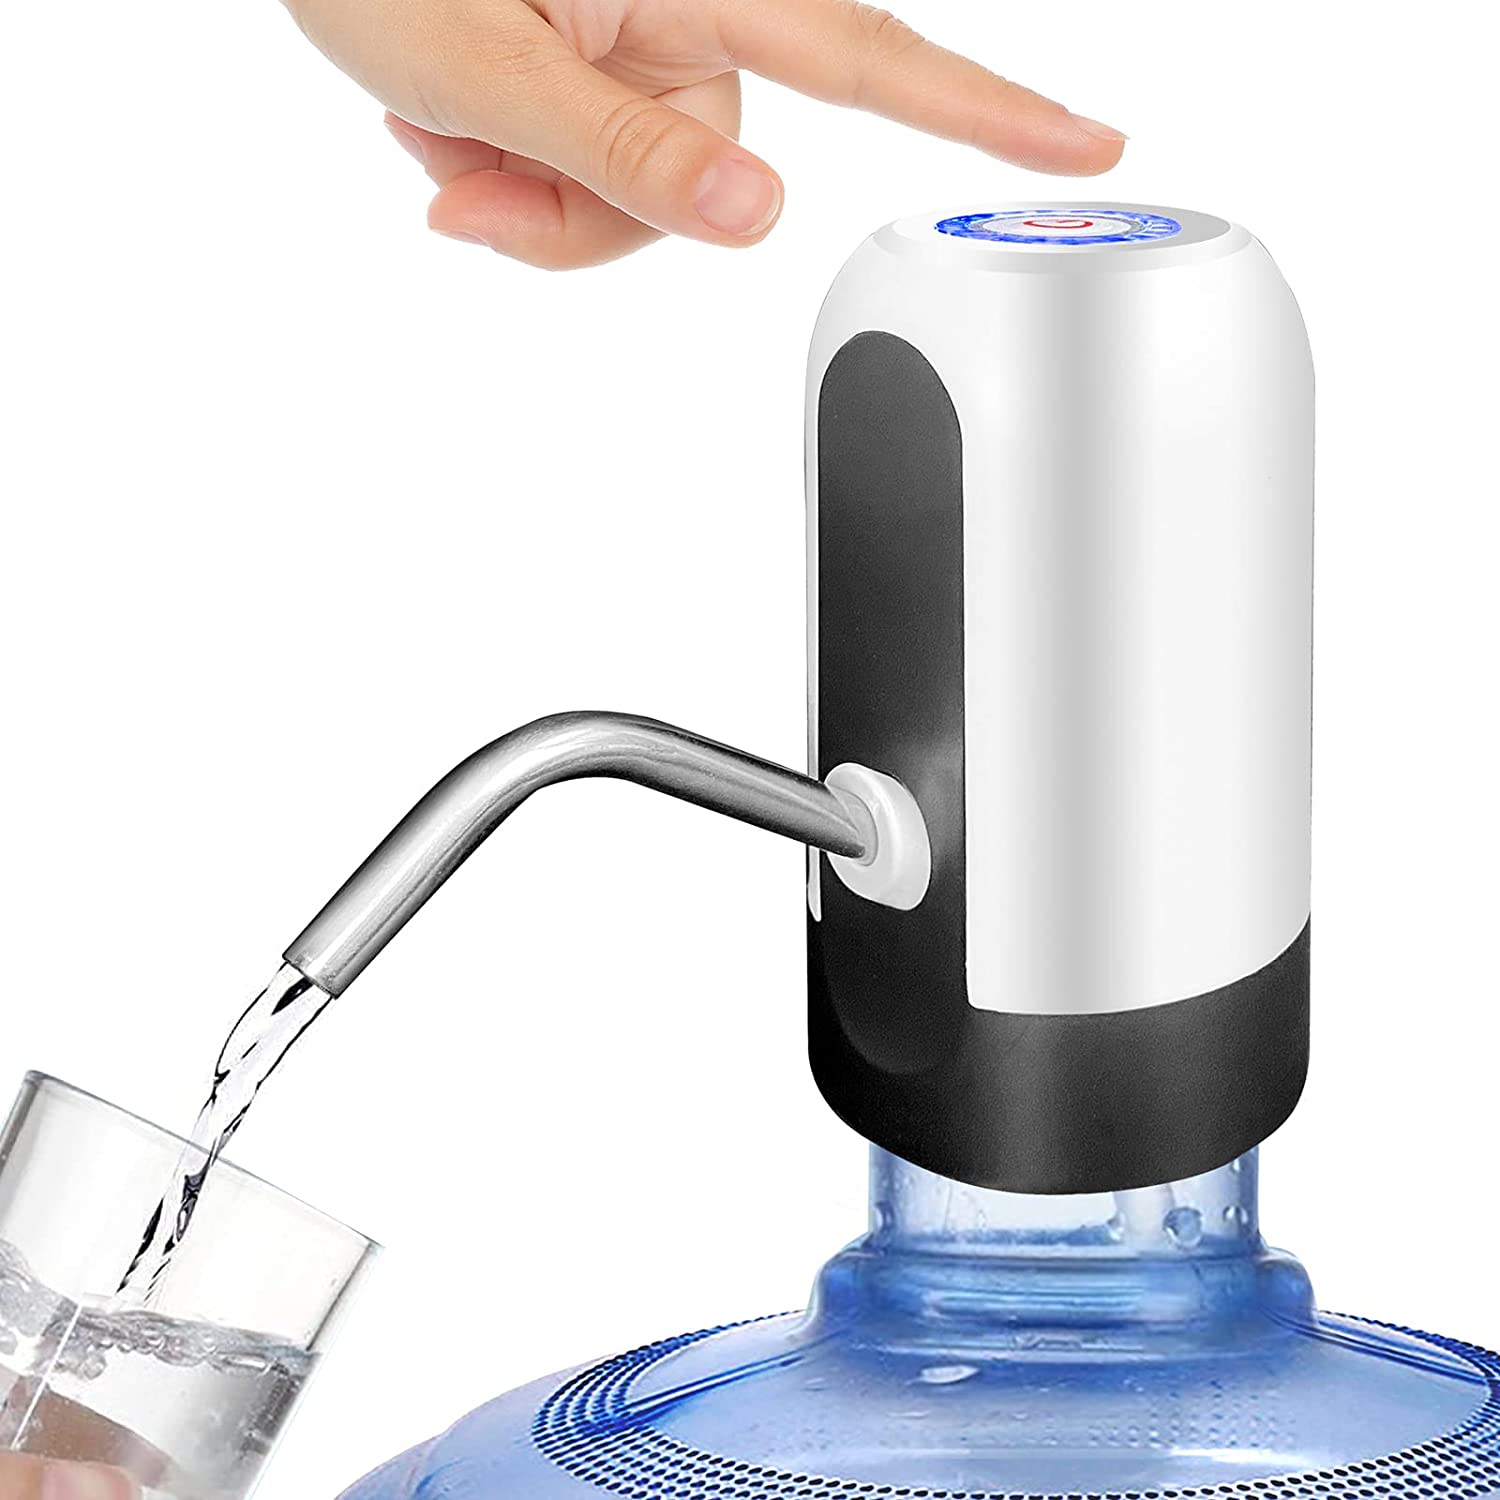 2023 Fall Savings! Wjsxc Kitchen Gadgets Clearance, Electric Water Bottle Pump USB Charging Drinking Water Dispenser for 5 Gallon Water Bottles